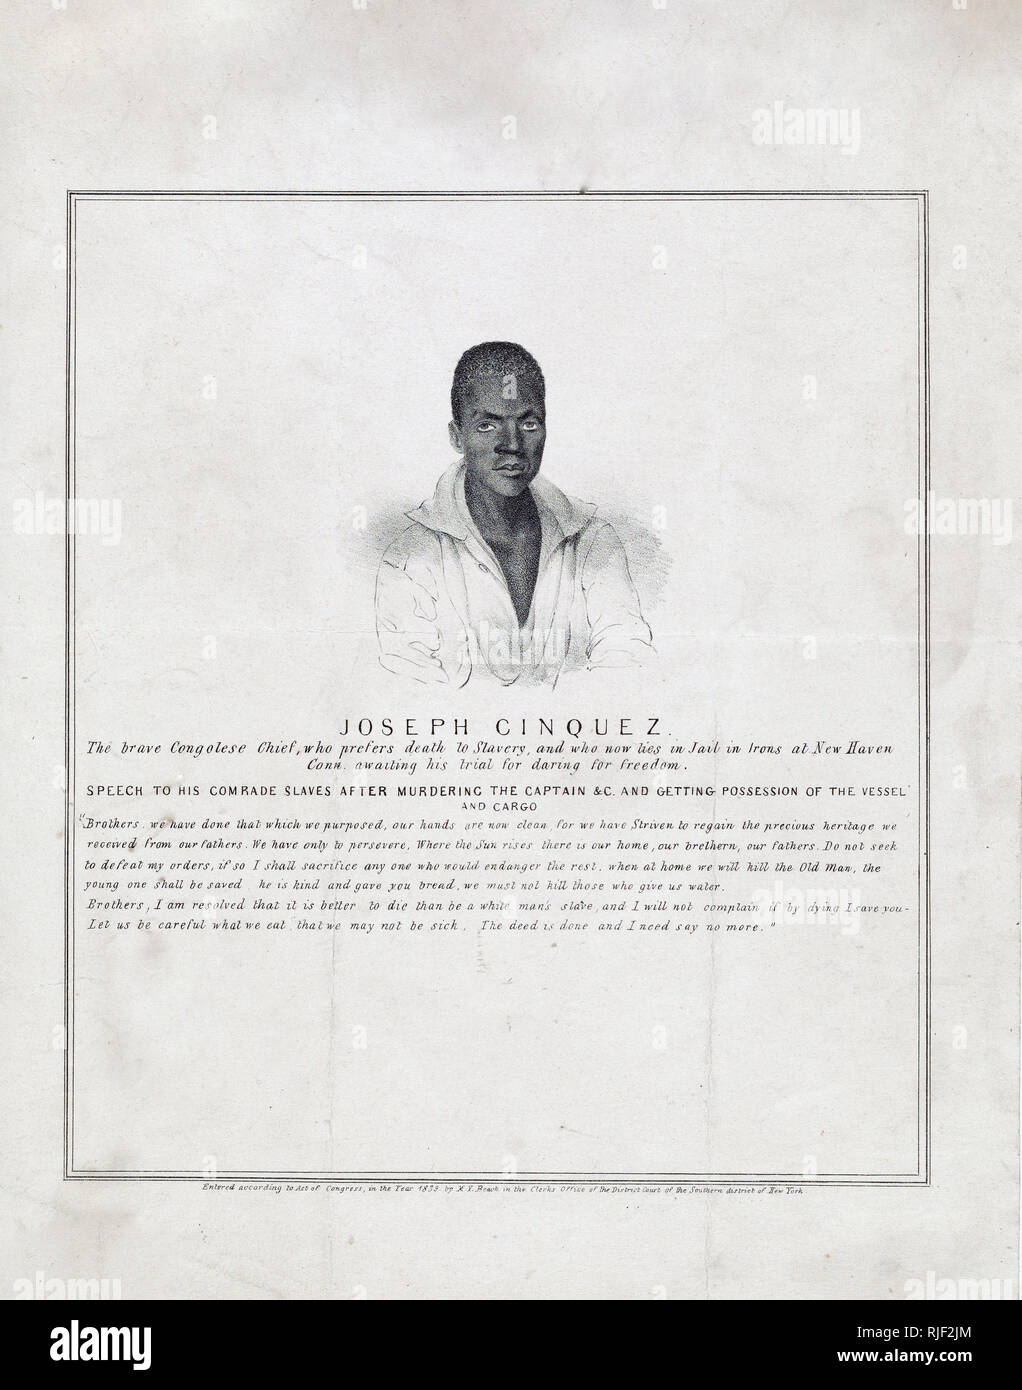 Joseph Cinquez was the leader of a revolt among African slaves aboard the Spanish ship 'Amistad' en route to Cuba in June 1839. The slaves seized control of the ship but were soon recaptured and charged with murder and piracy. This portrait was done while Cinquez (or 'Cinque') awaited trial in New Haven, Connecticut. John Quincy Adams represented the Africans before the Supreme Court, and thanks to his eloquence, they were set free and allowed to return to Africa. Stock Photo